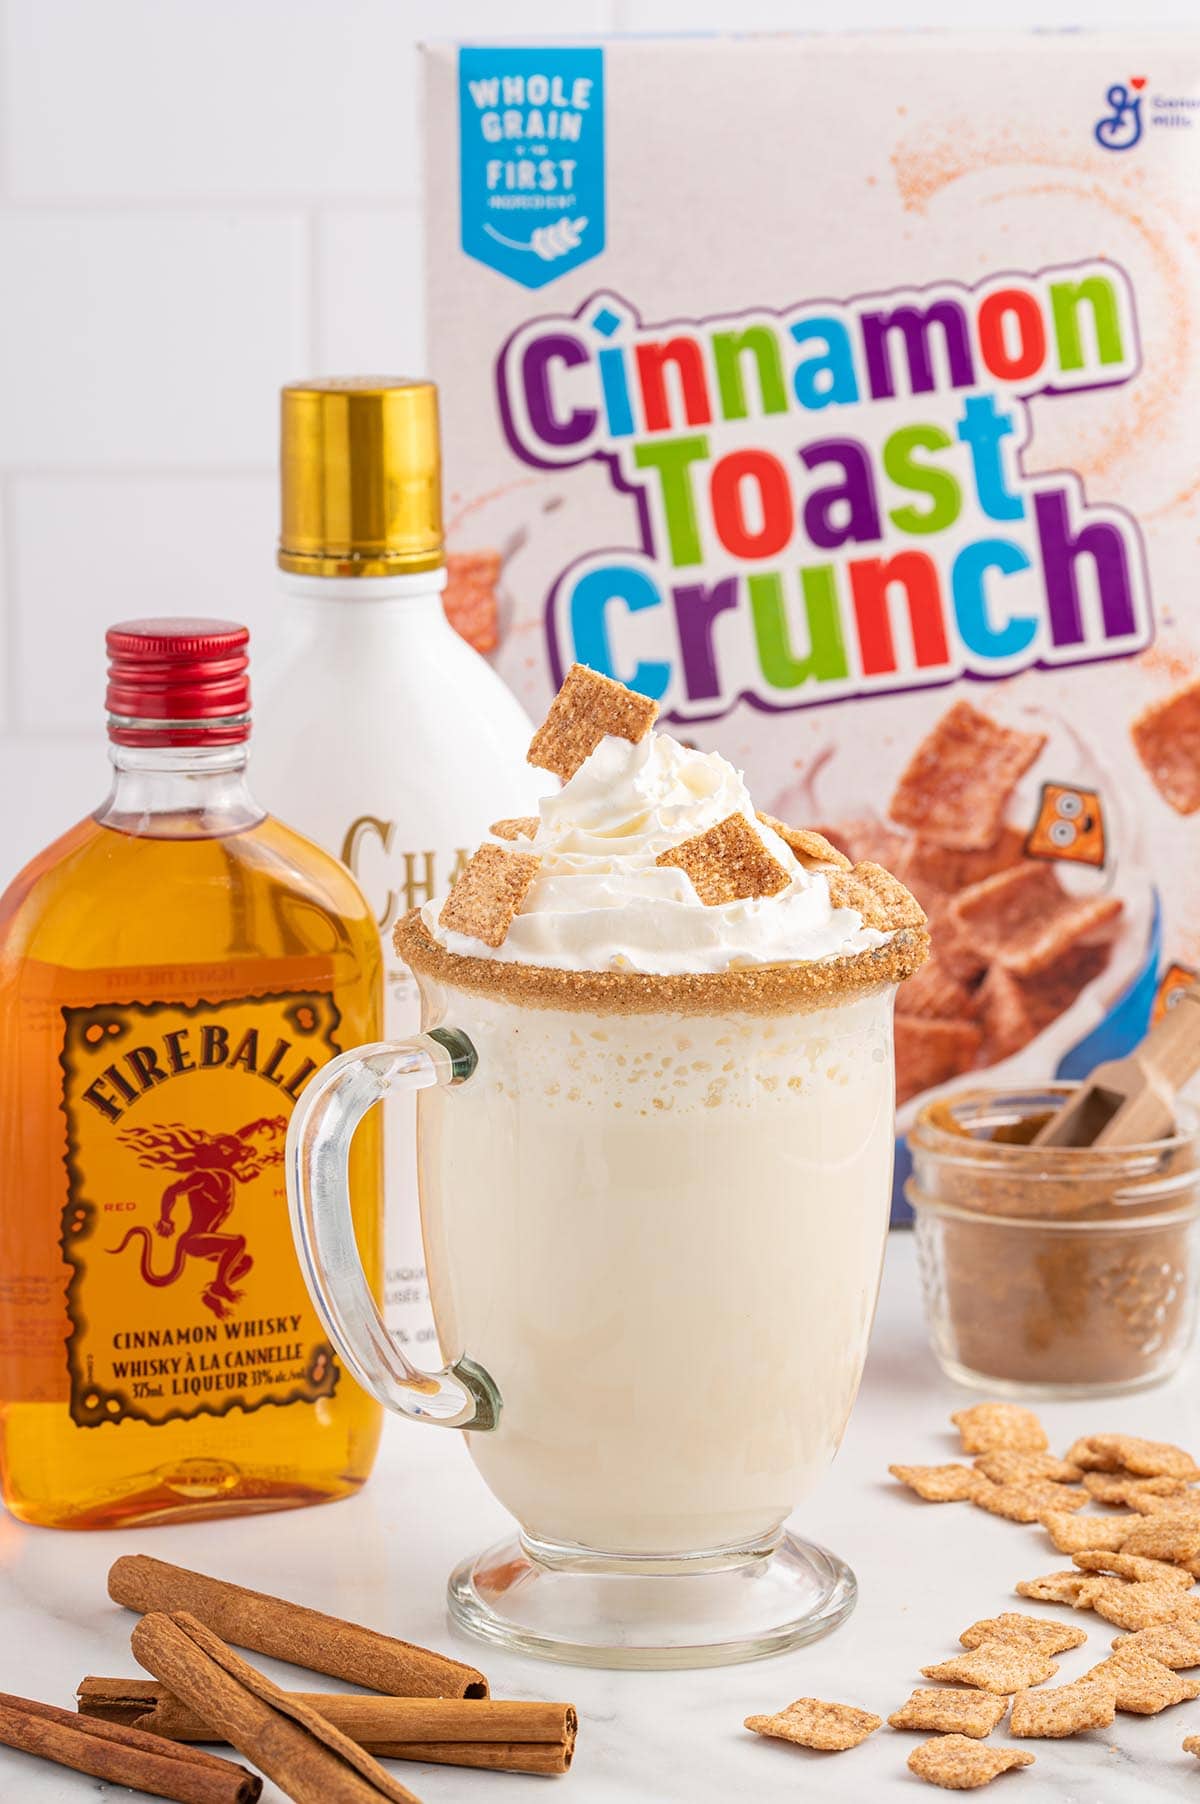 A glass mug of Cinnamon Toast Crunch Cocktail and some cinnamon stick and cinnamon toast crunch cereal scattered on the table.